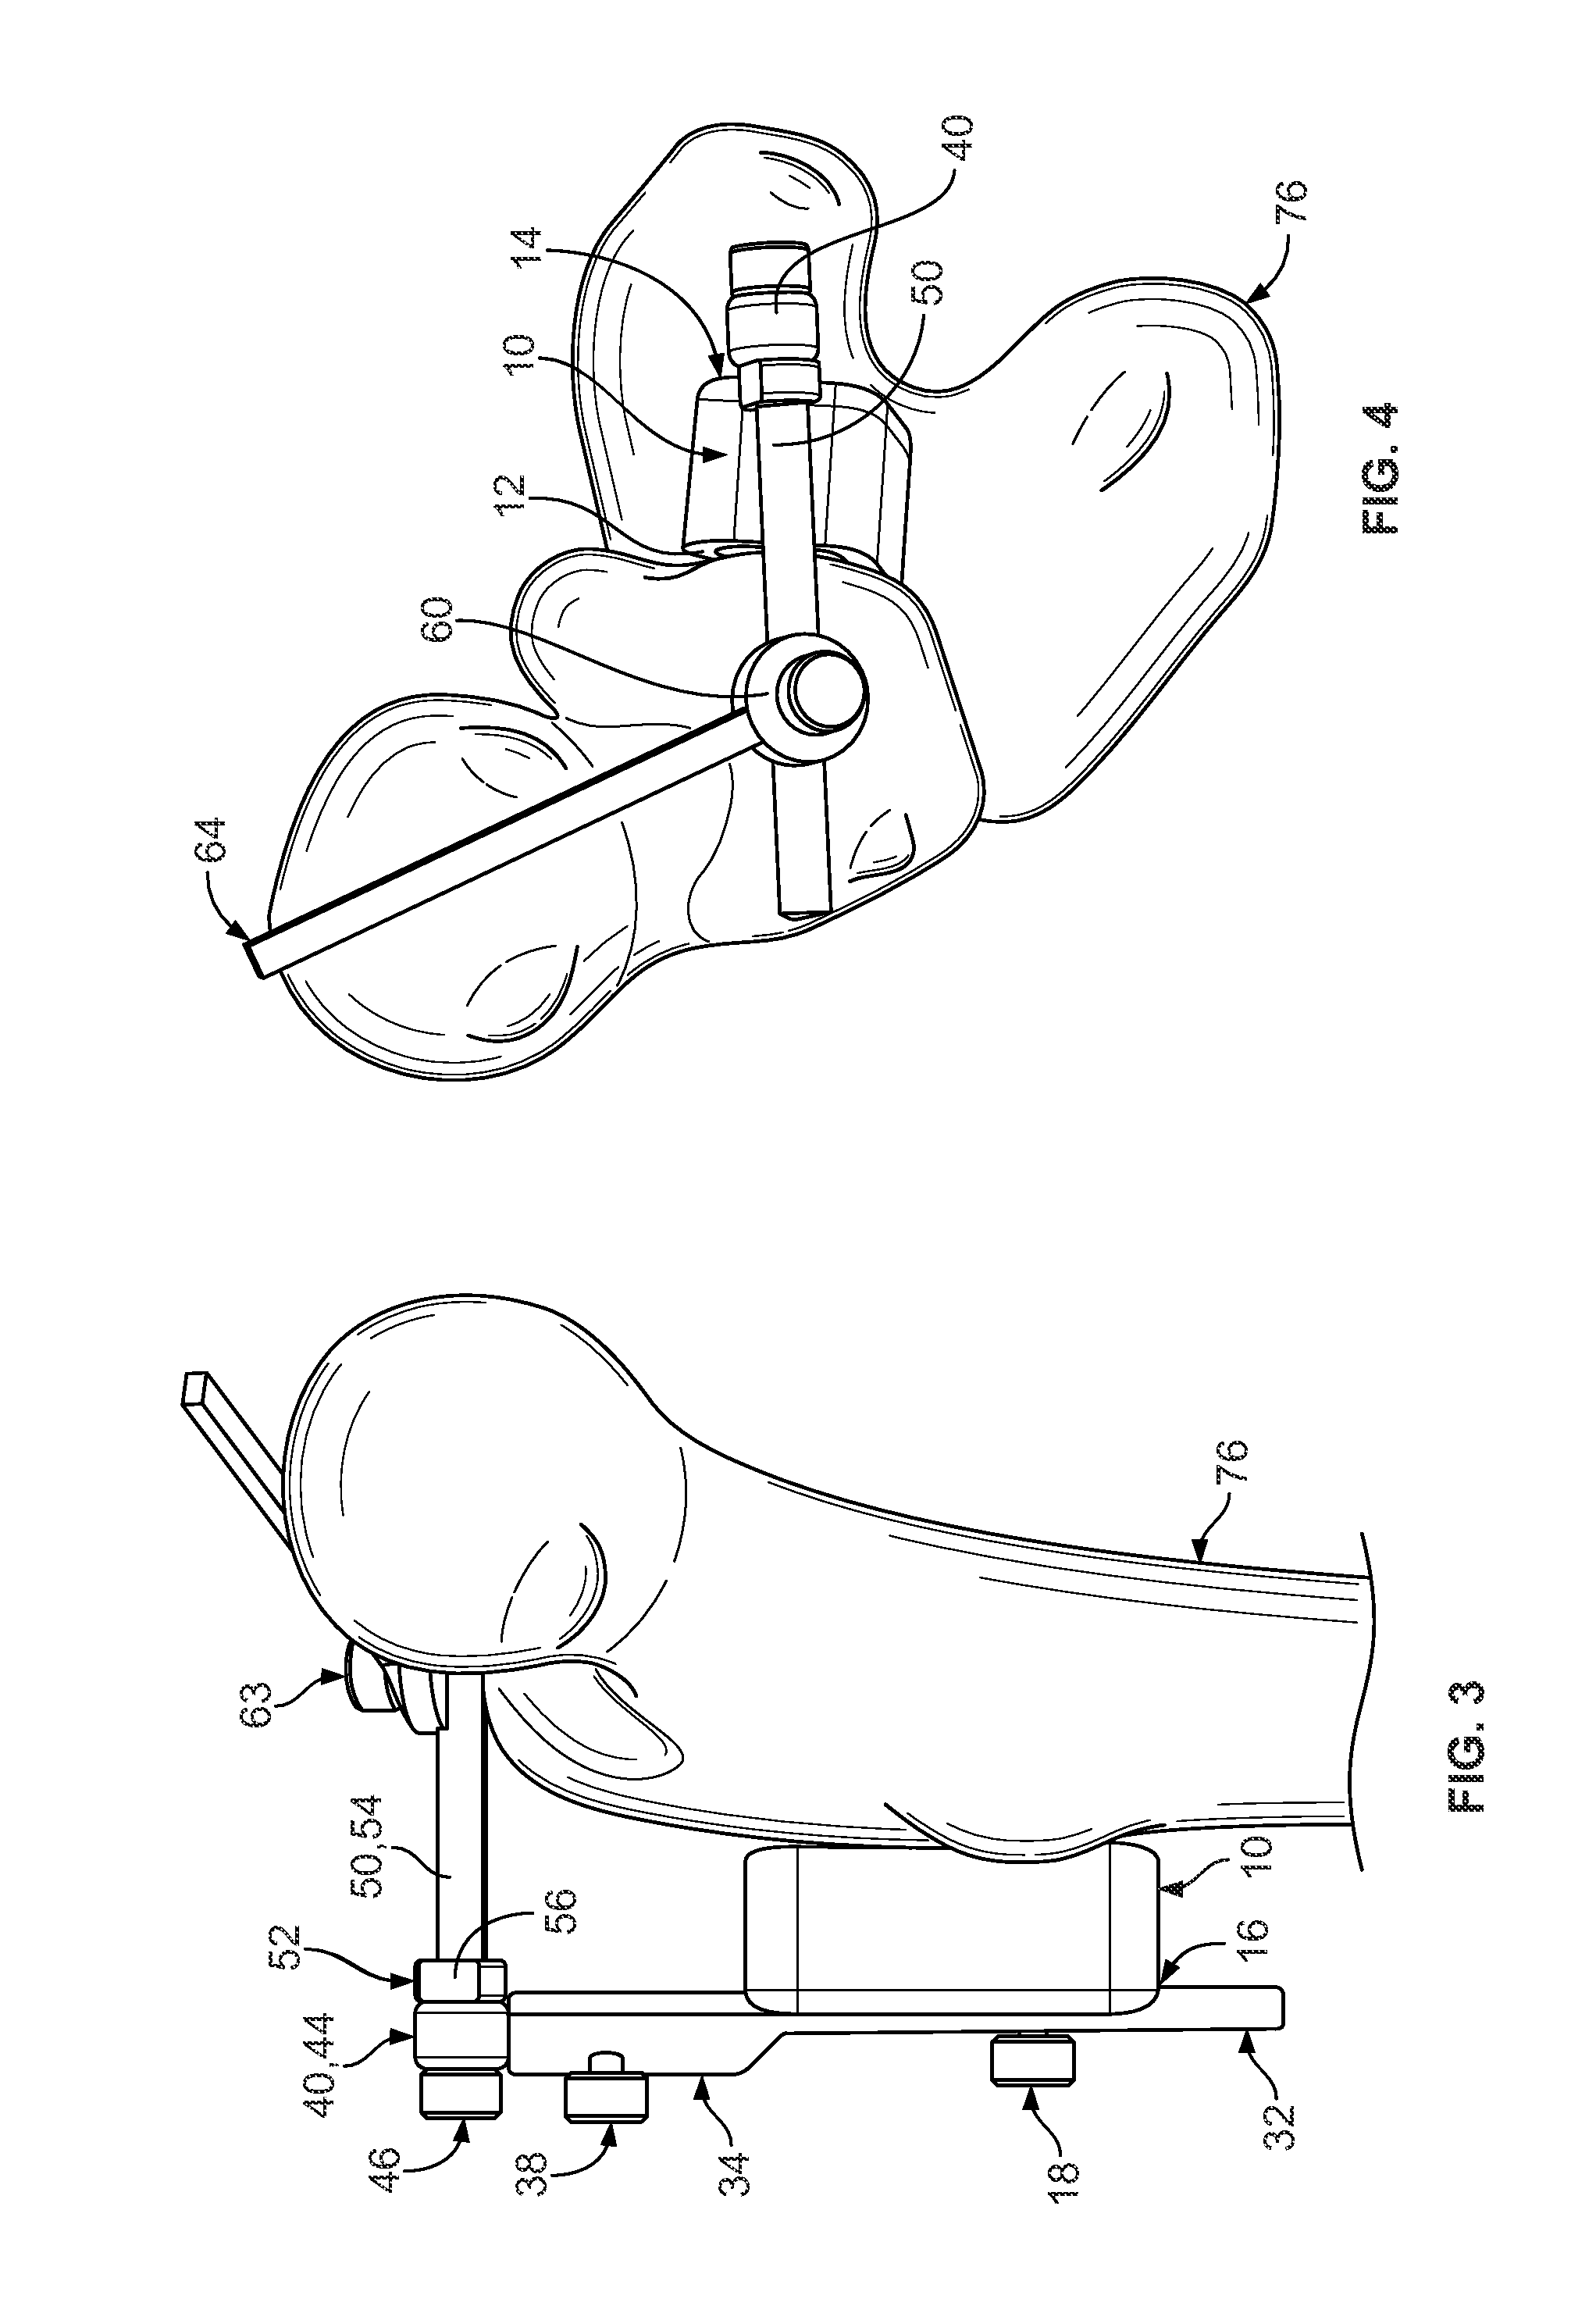 Native version alignment devices and methods